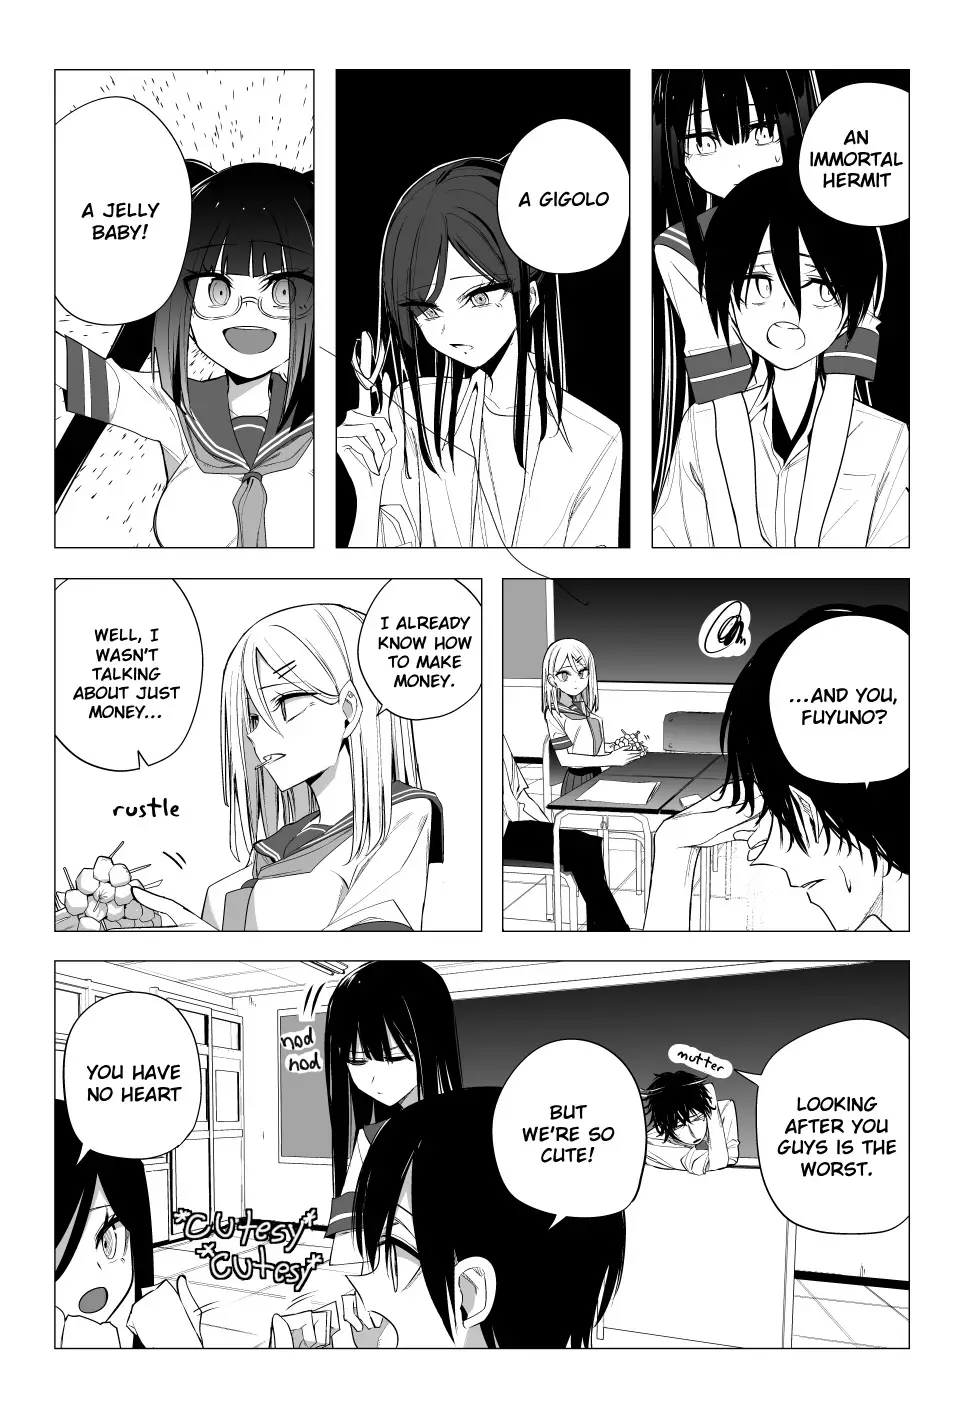 Mitsuishi-San Is Being Weird This Year - 33 page 7-9480dbe0